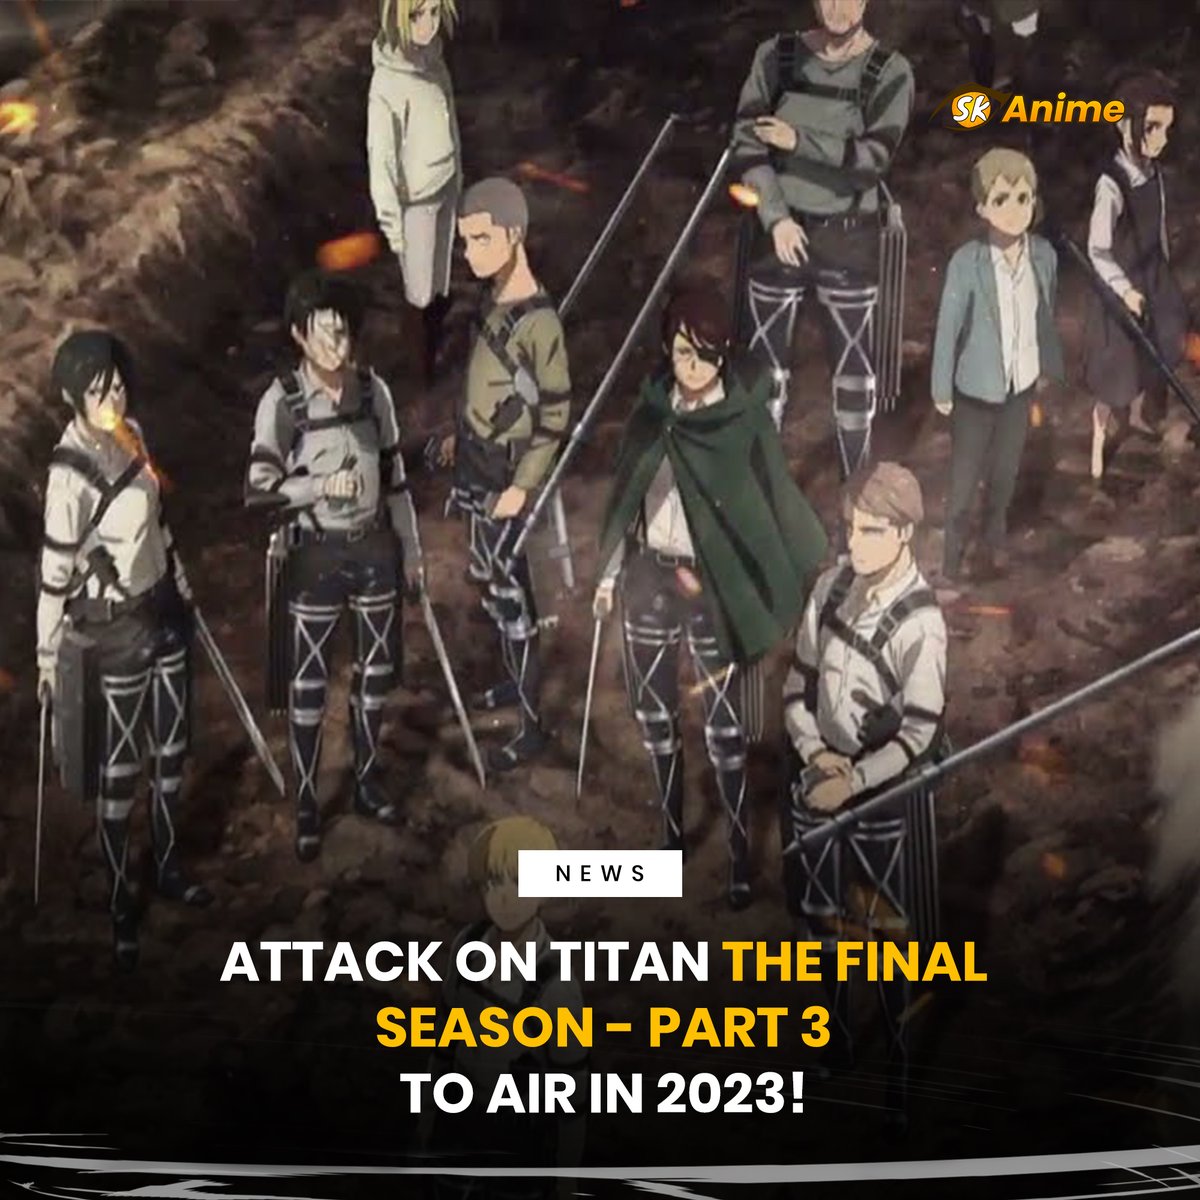 Attack on Titan: The Final Season - Part 3' Announced for 2023